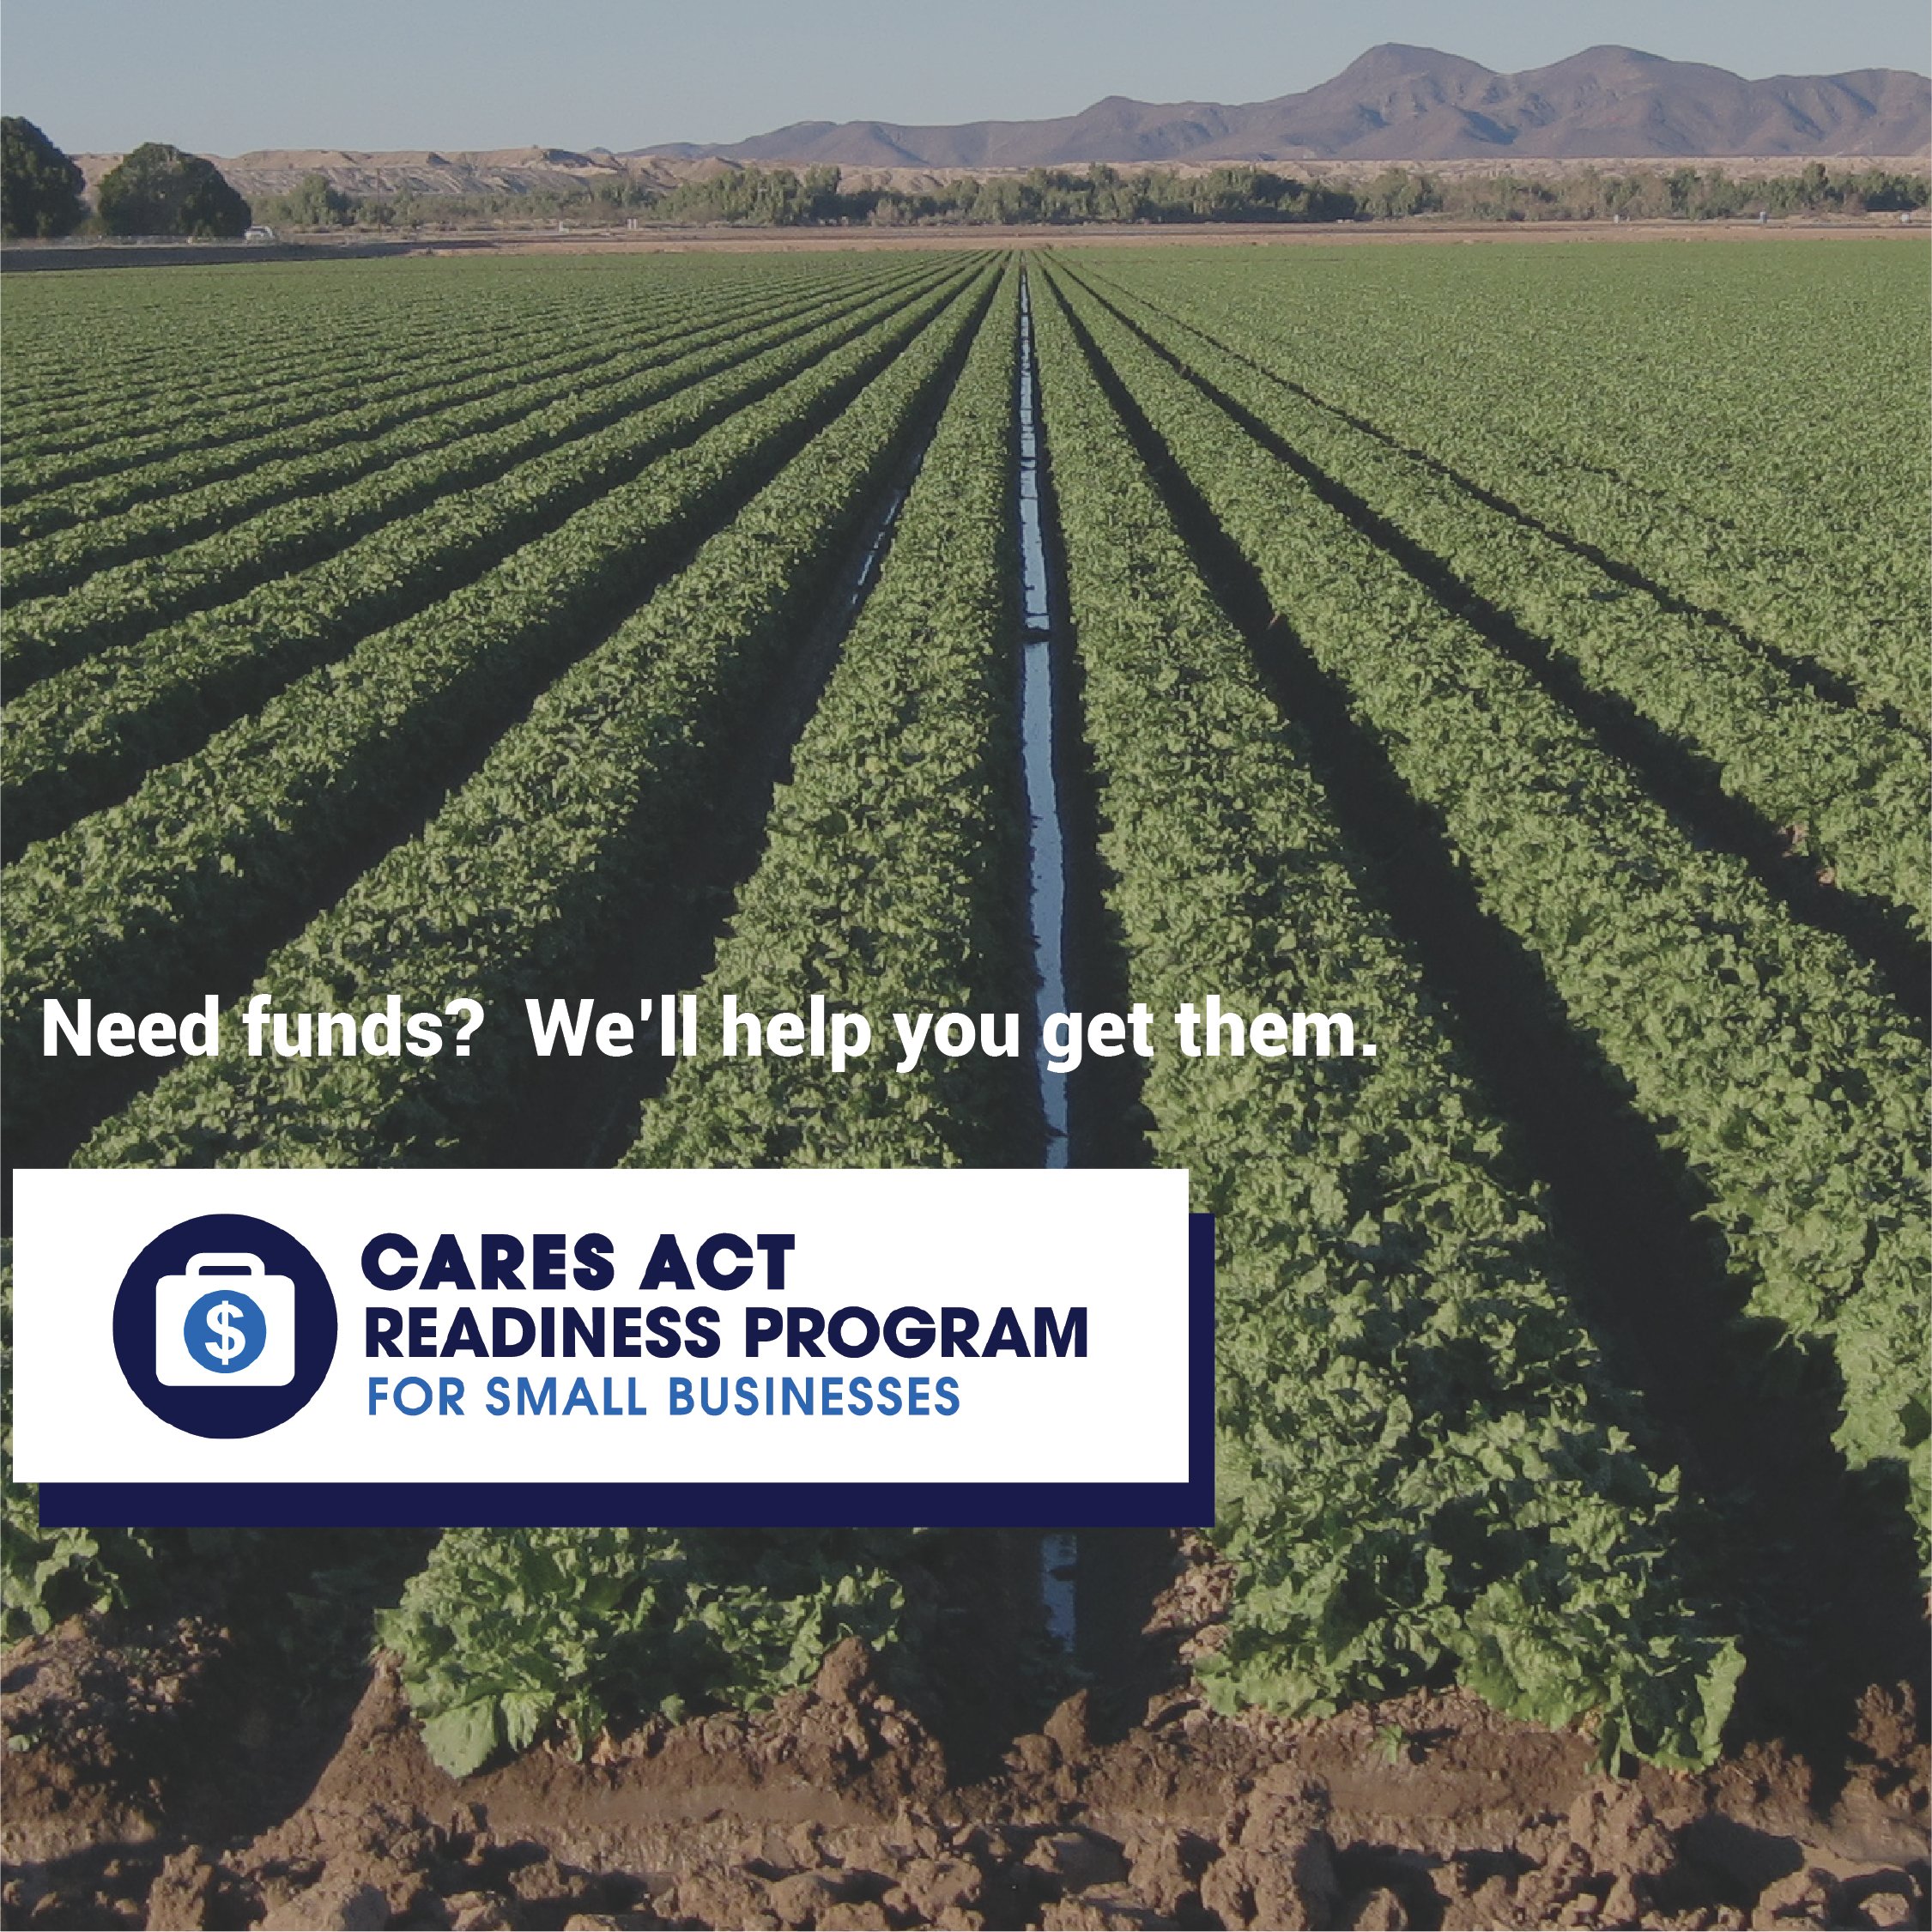 CARES Act Readiness Program for small business